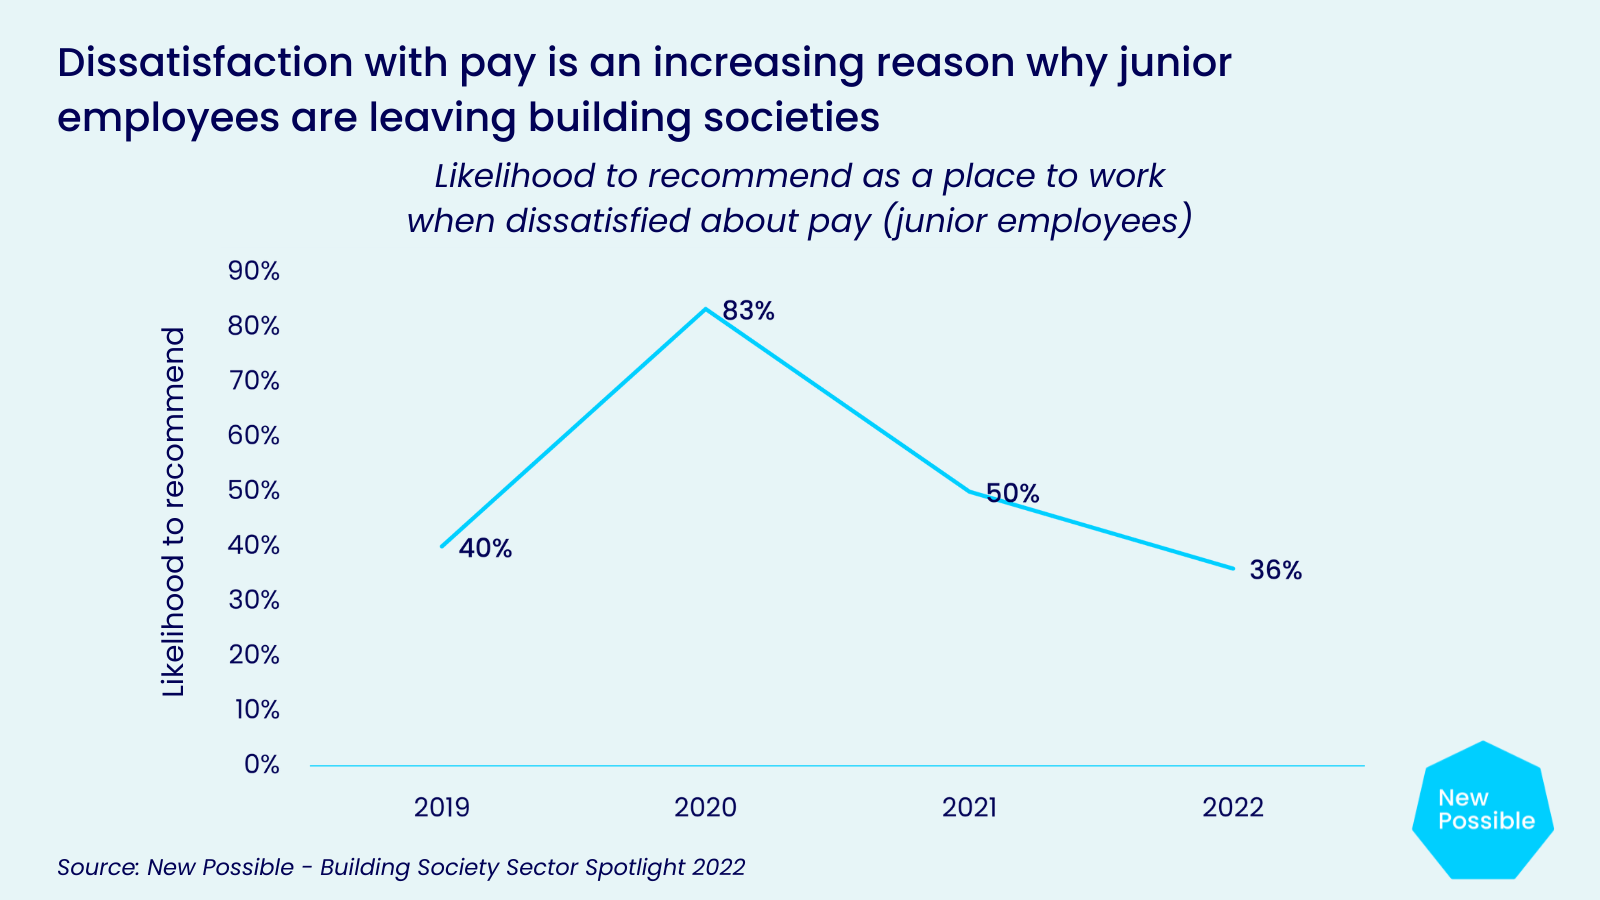 Dissatisfaction with pay is an increasing reason why junior employees are leaving building societies